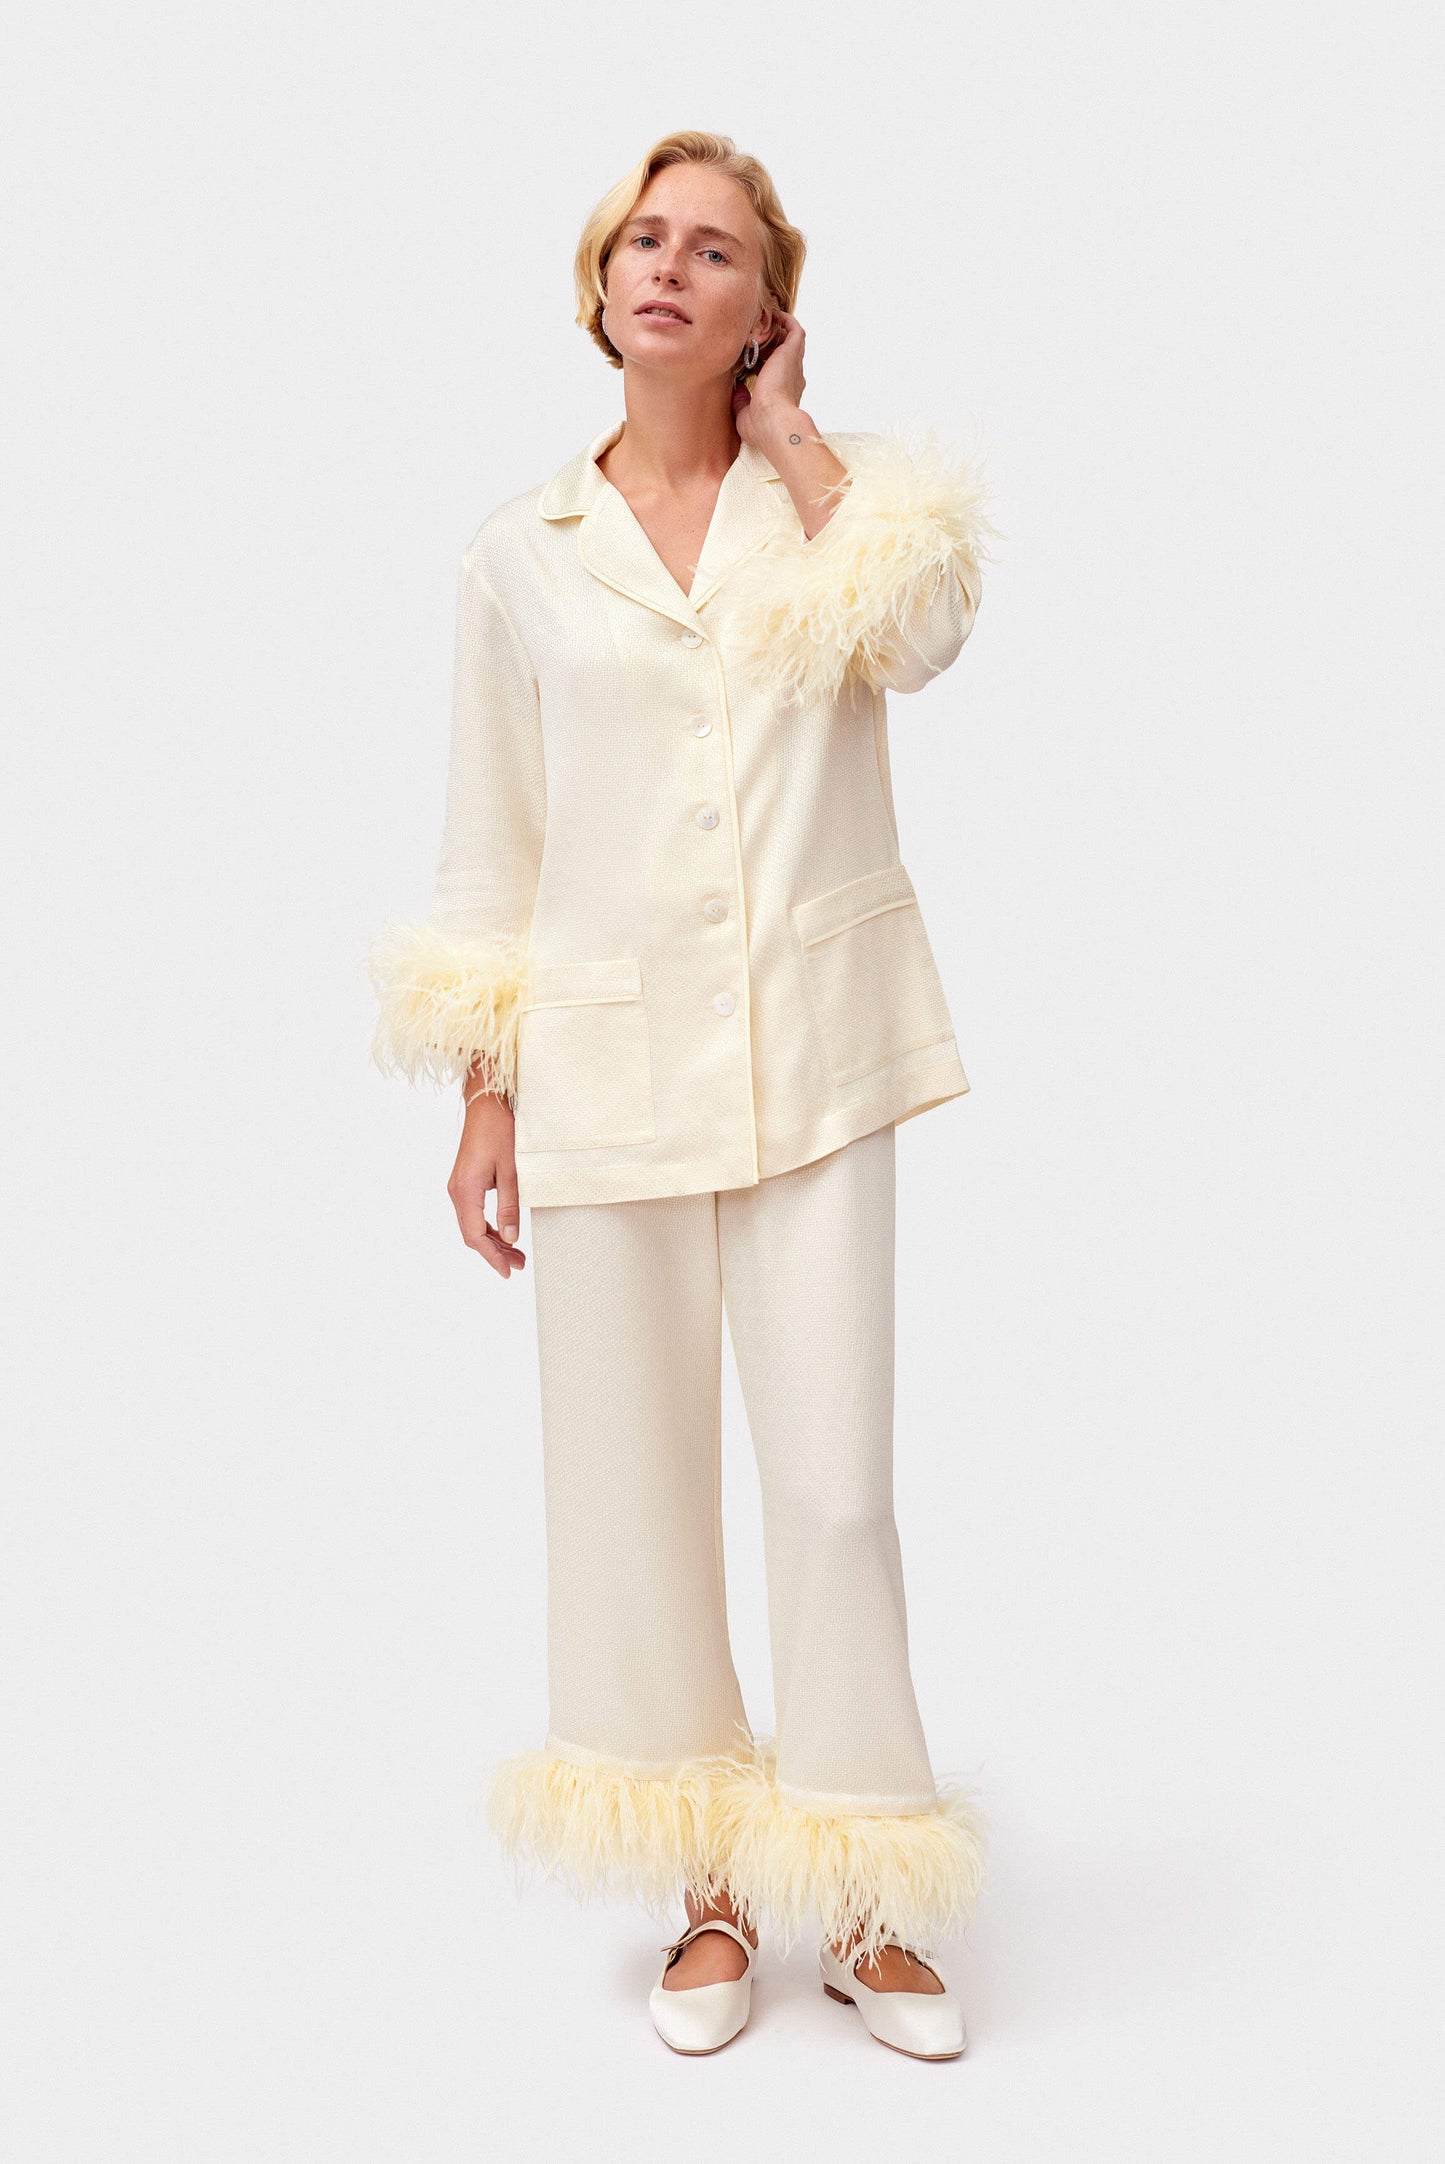 Jacquard Pajama Set with Feathers in White